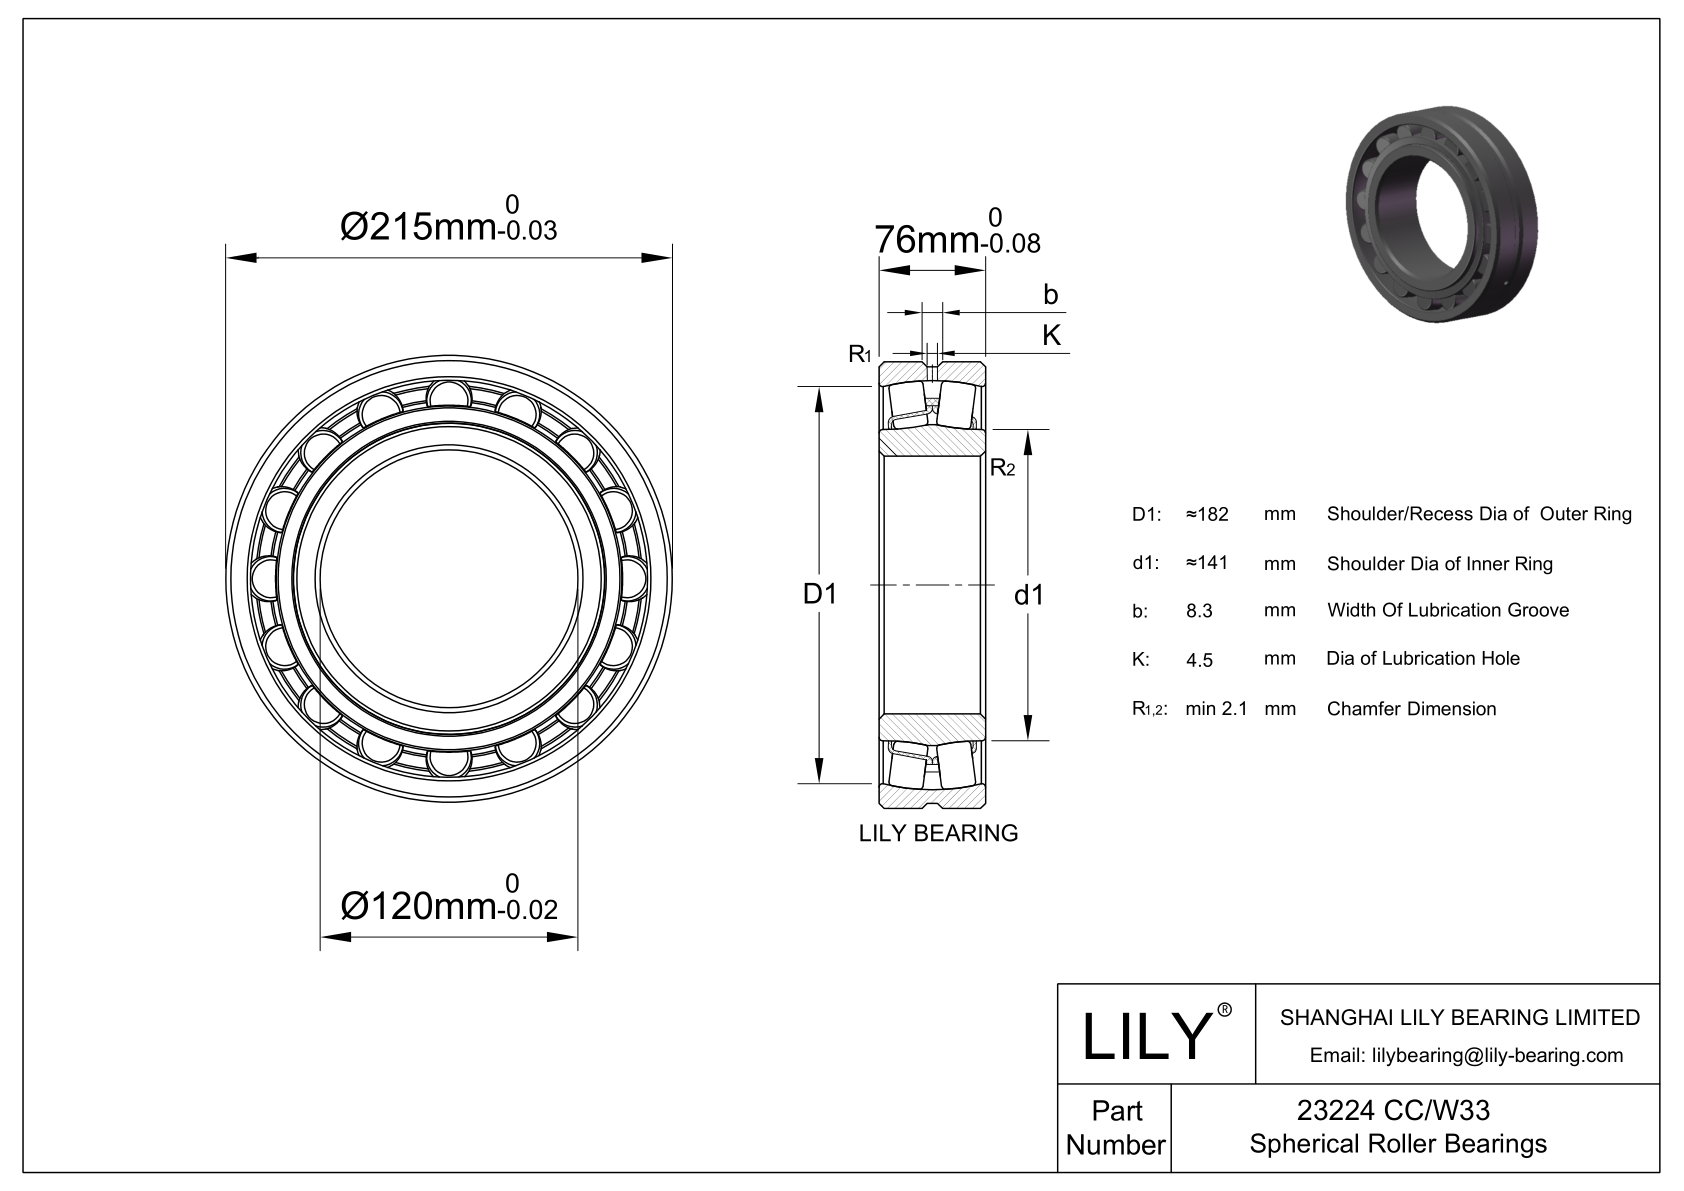 23224 CC/W33 Double Row Spherical Roller Bearing cad drawing